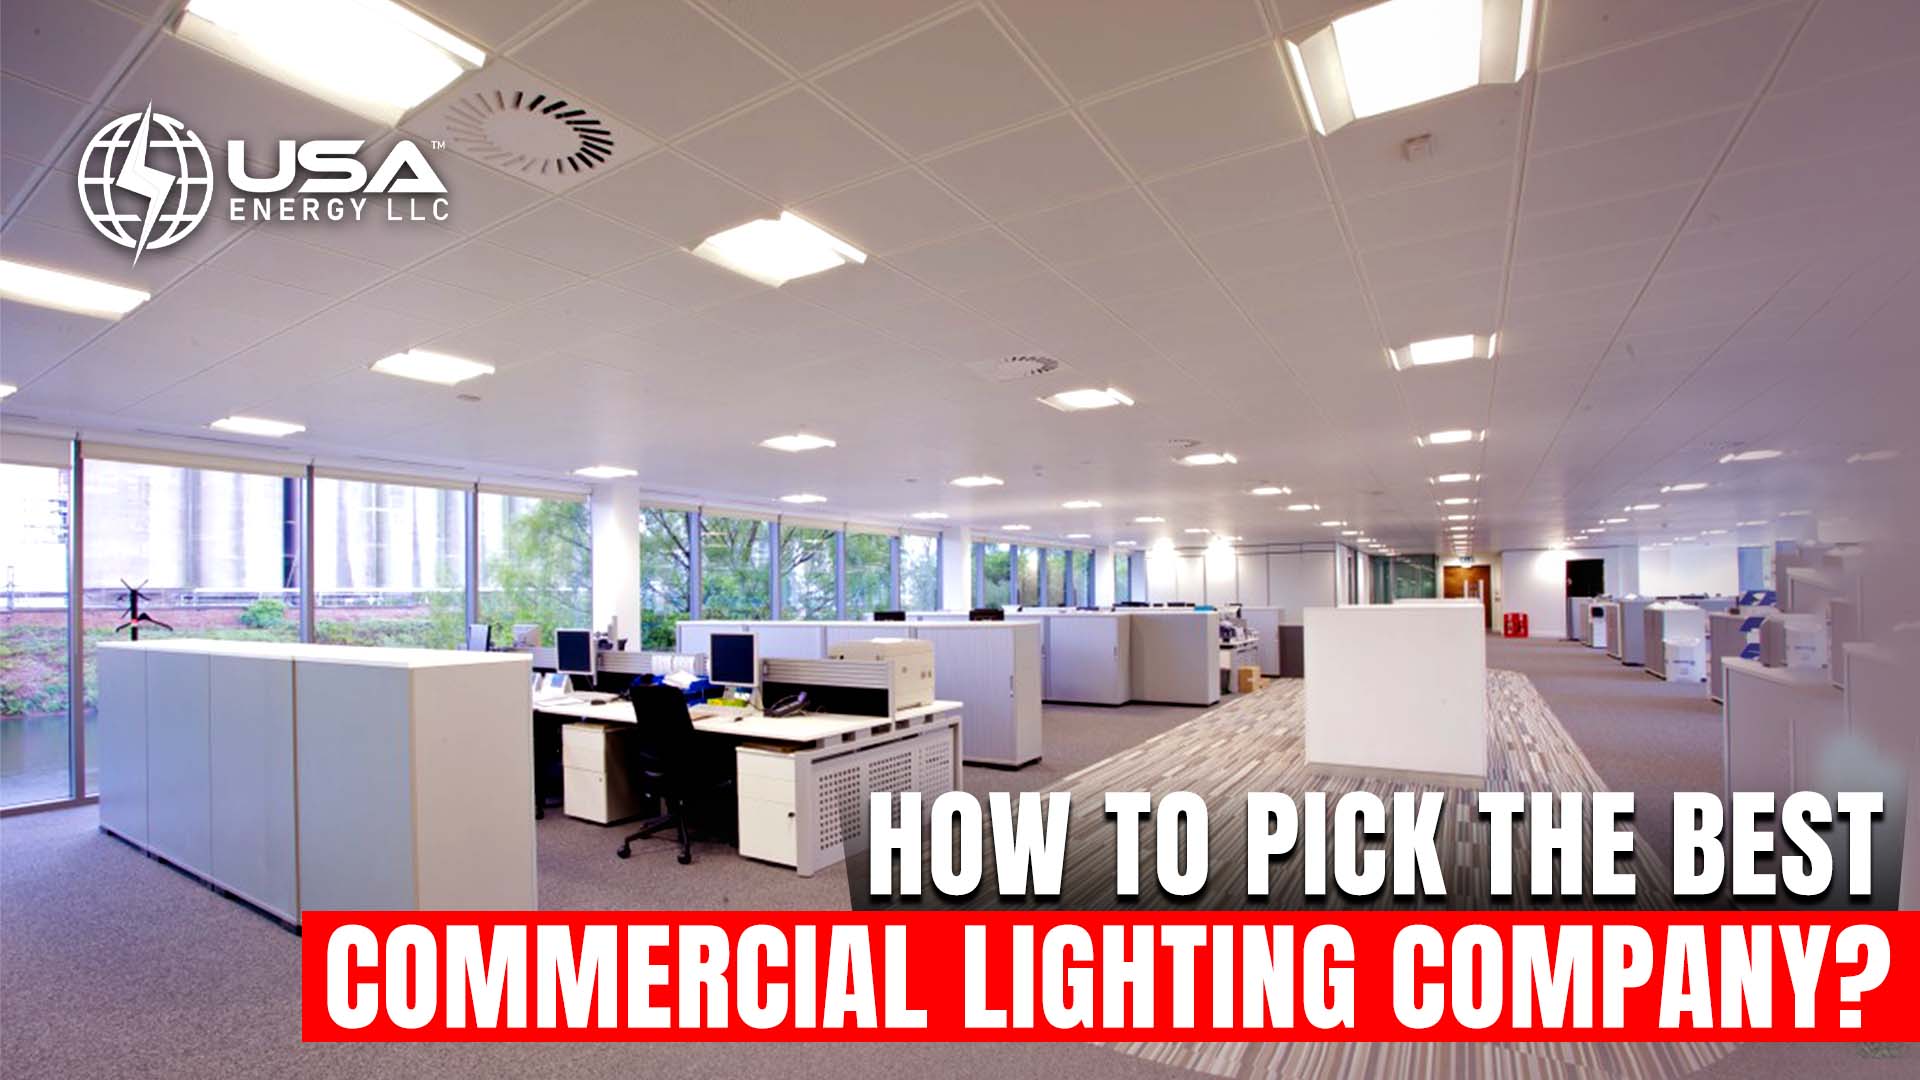 How to Pick the Best Commercial Lighting Company?